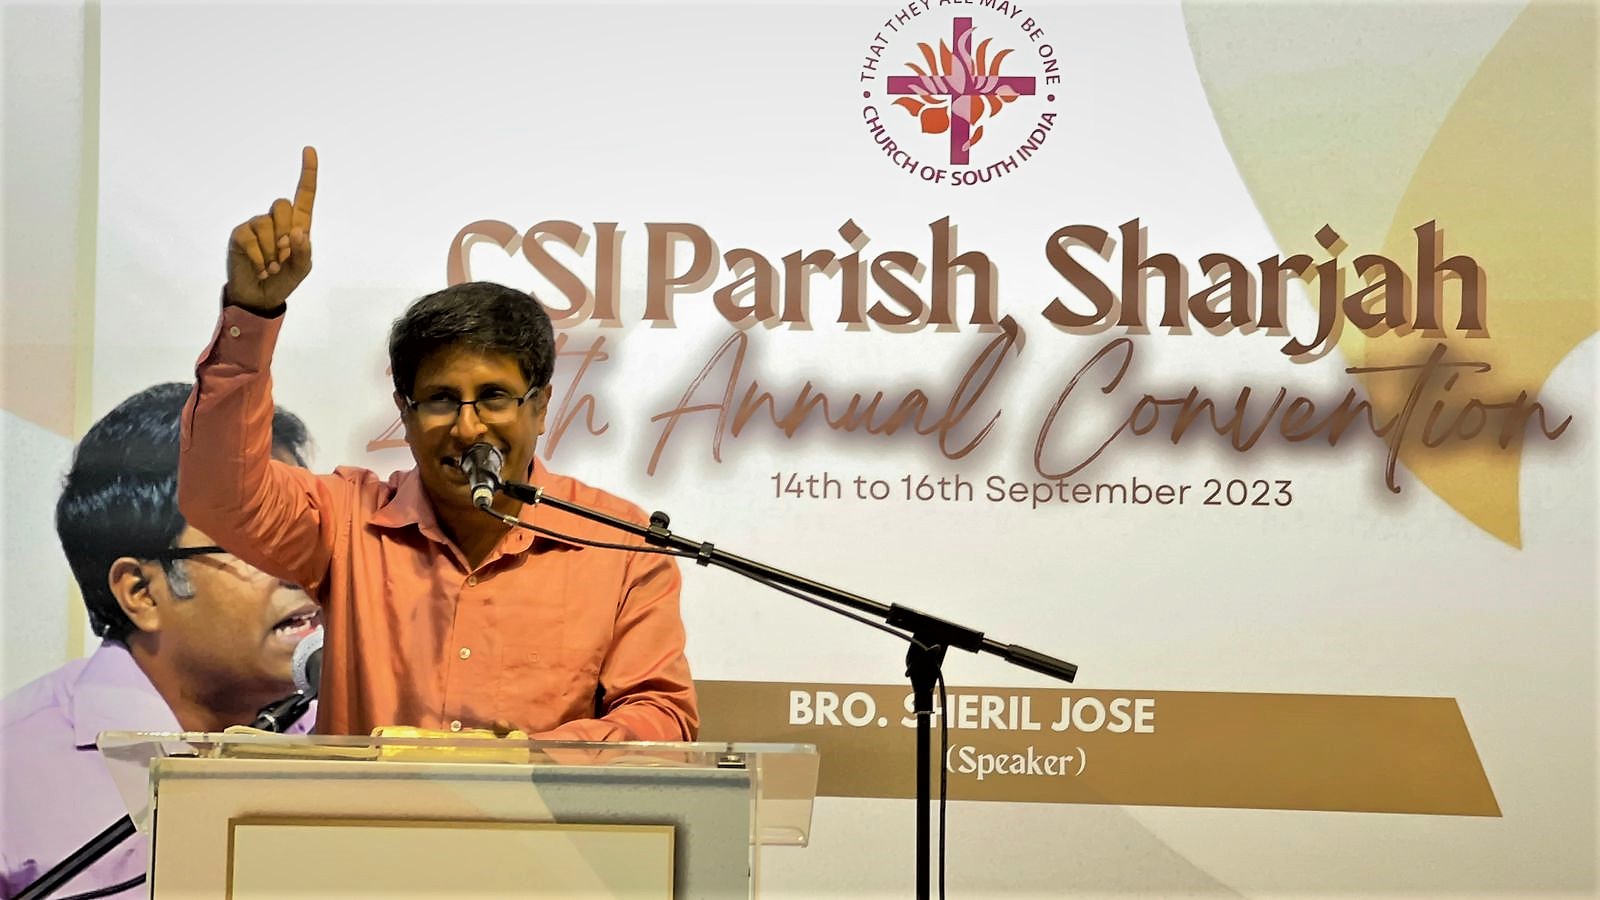 Brother Sheril Jose speaks the word of God